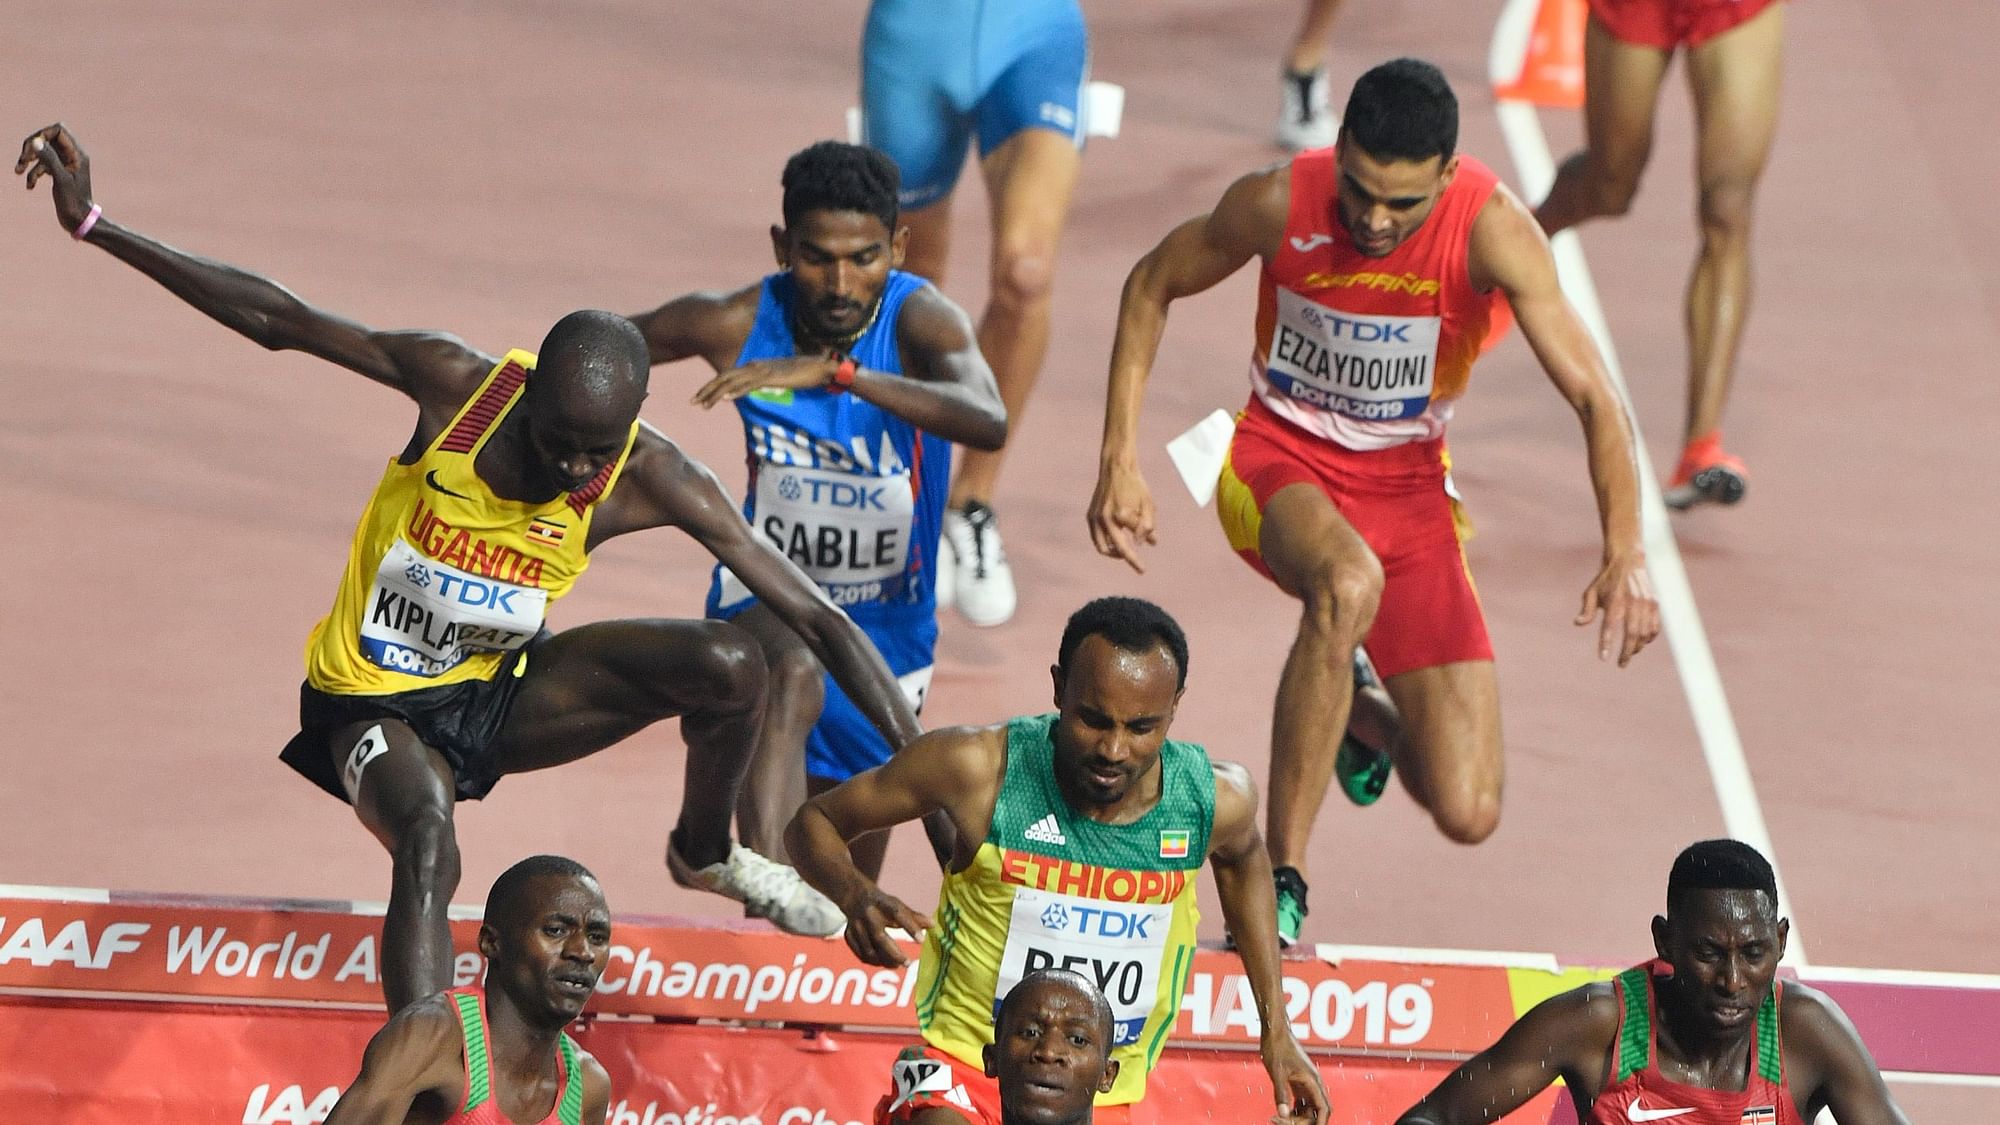 Avinash Sable made it to the men’s 3000m steeplechase finals under dramatic circumstances.